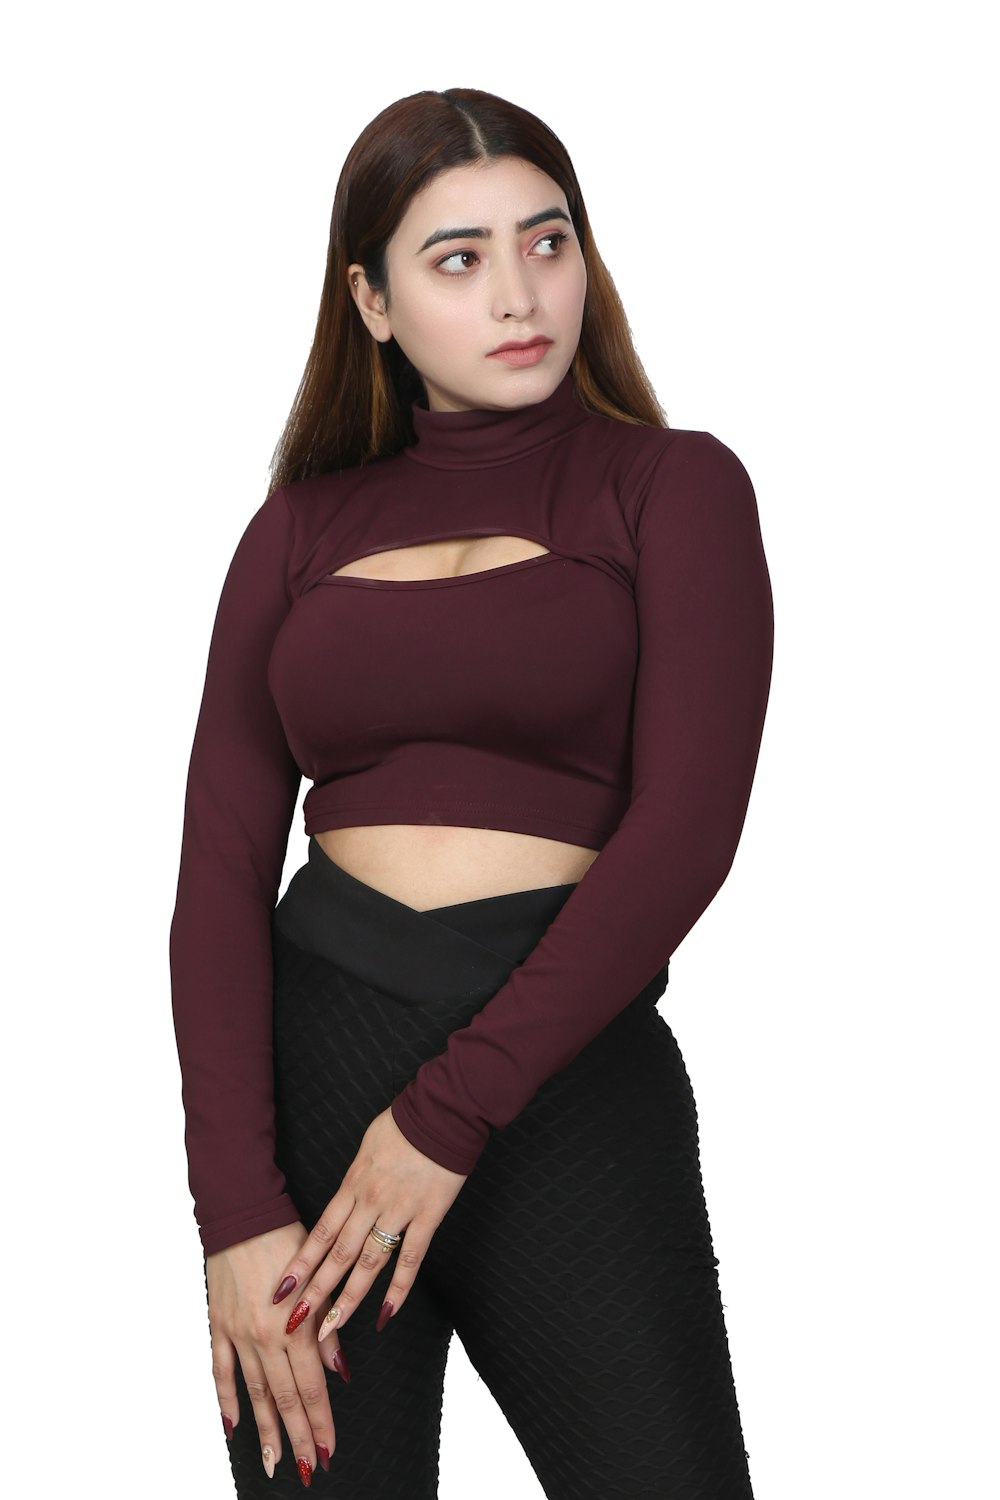 a woman in a maroon top and black pants